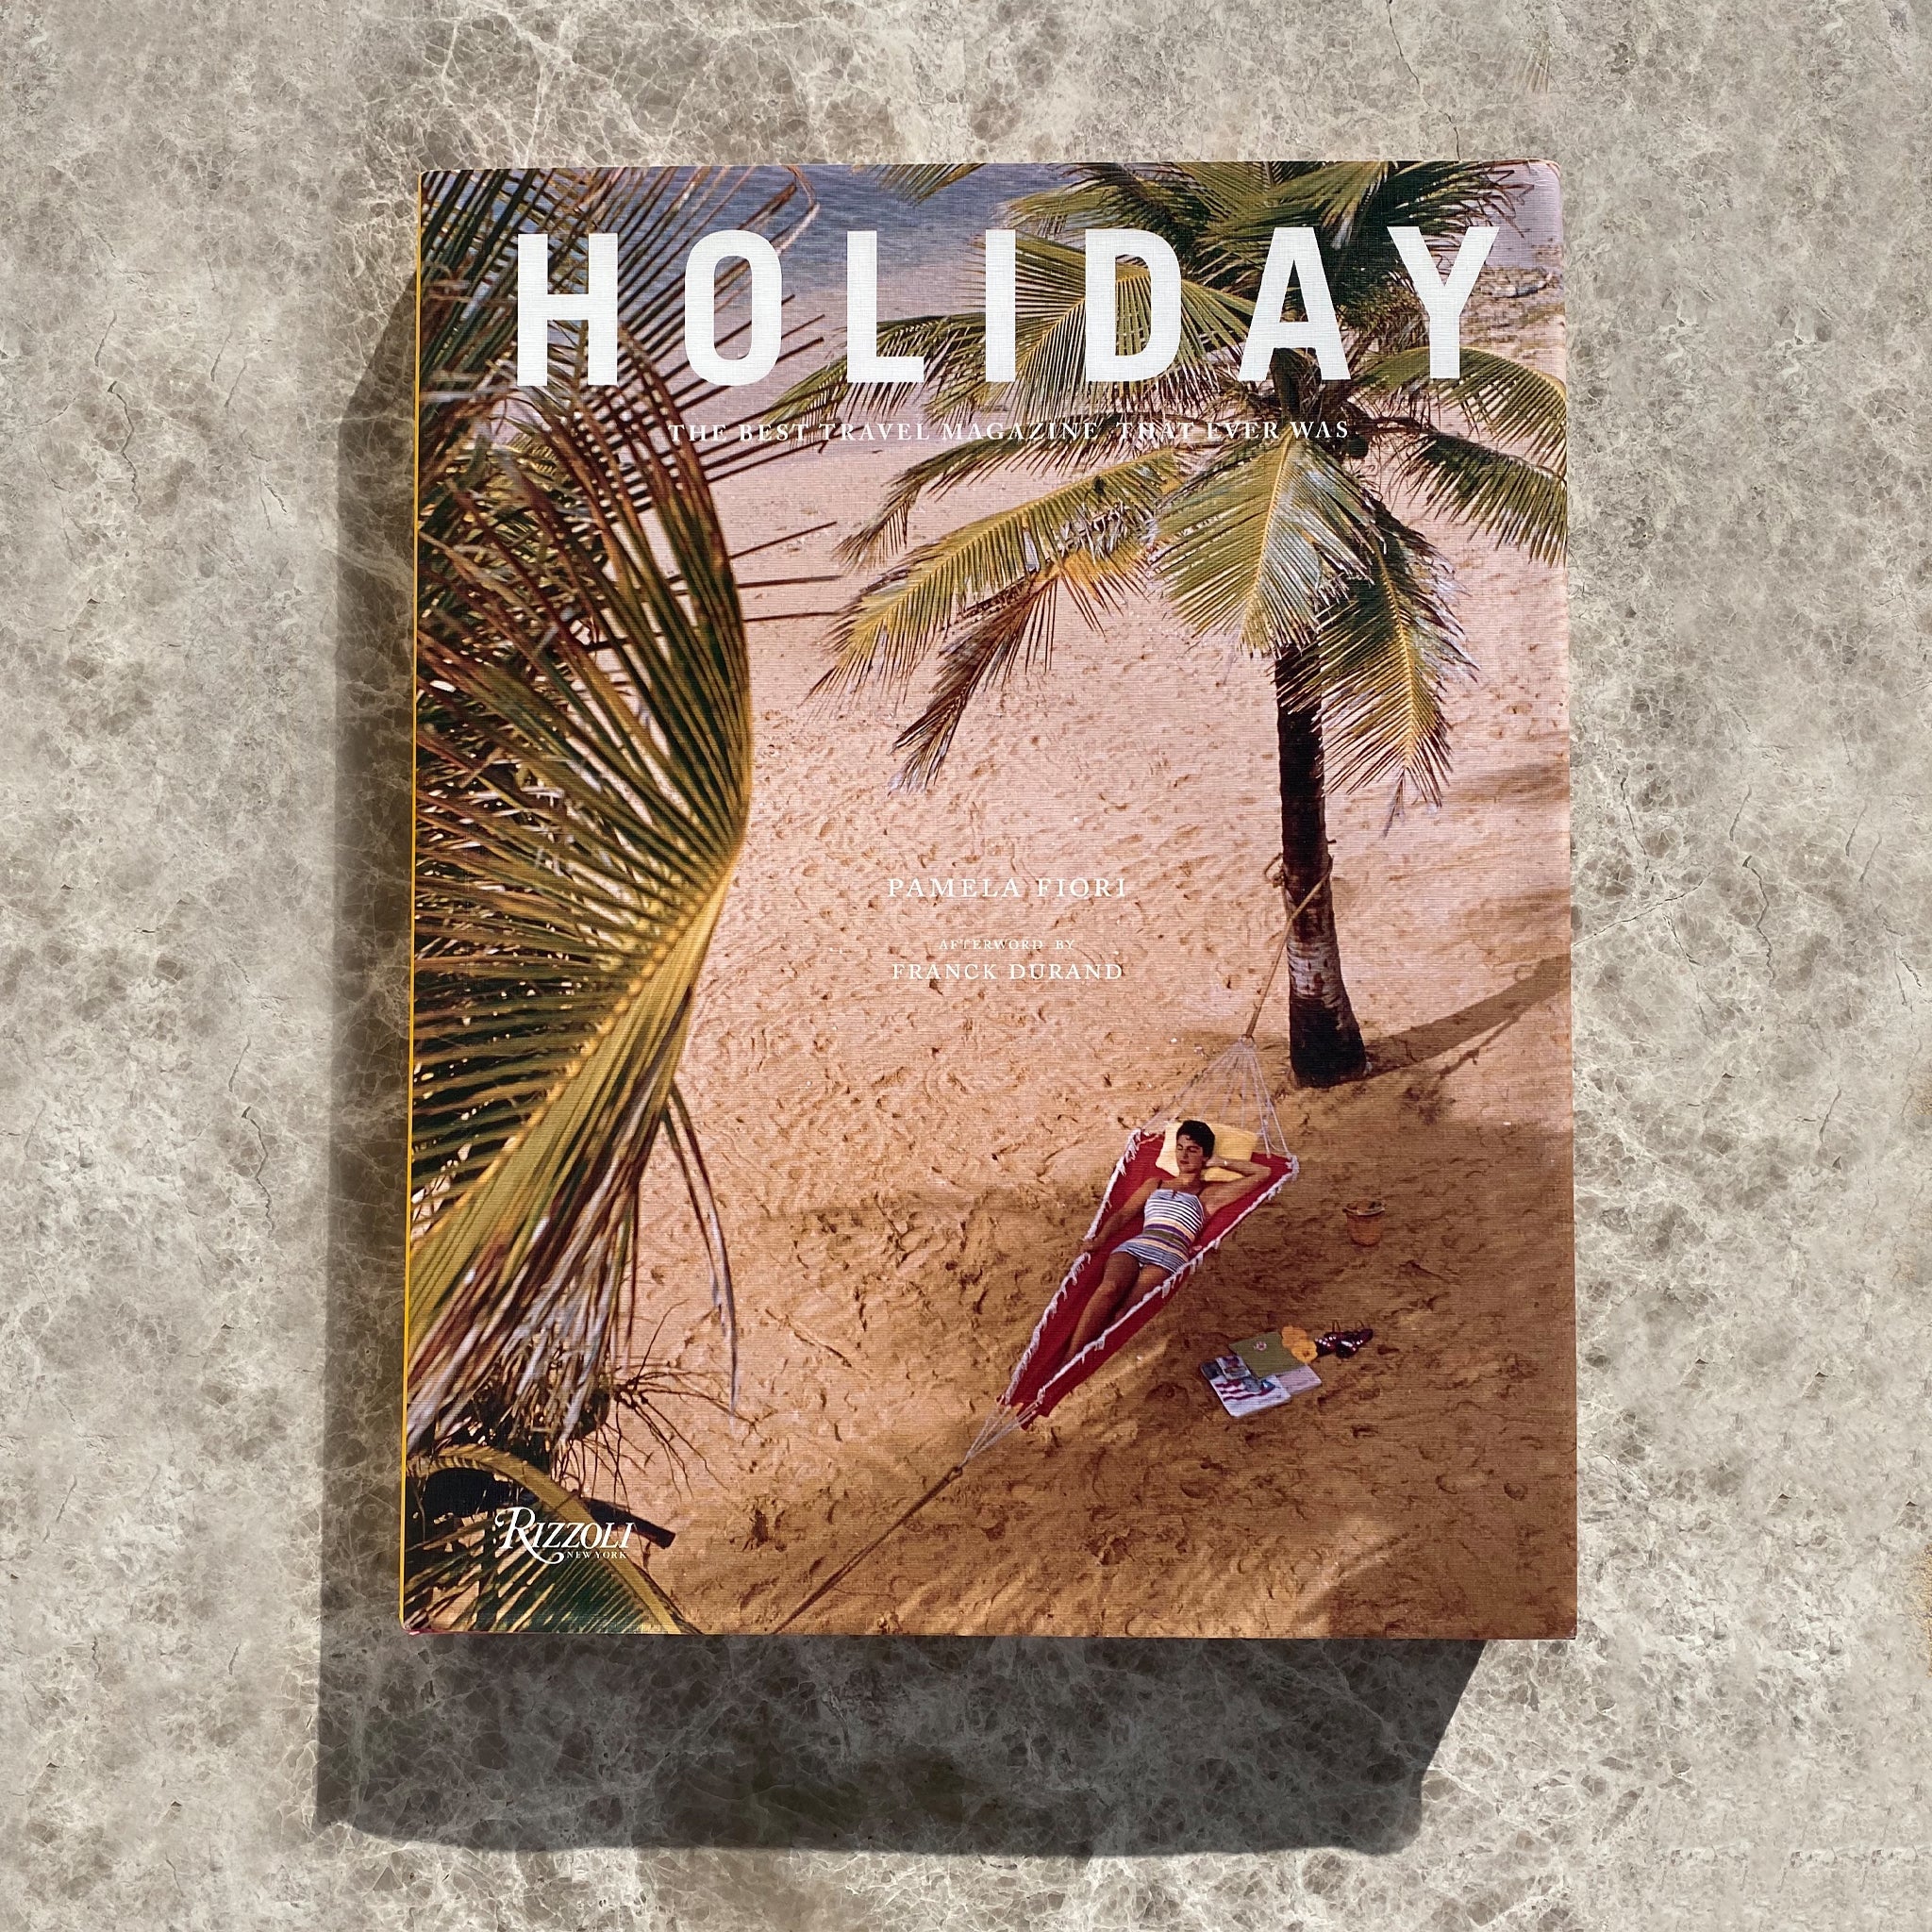 Holiday: The Best Travel Magazine That Ever Was